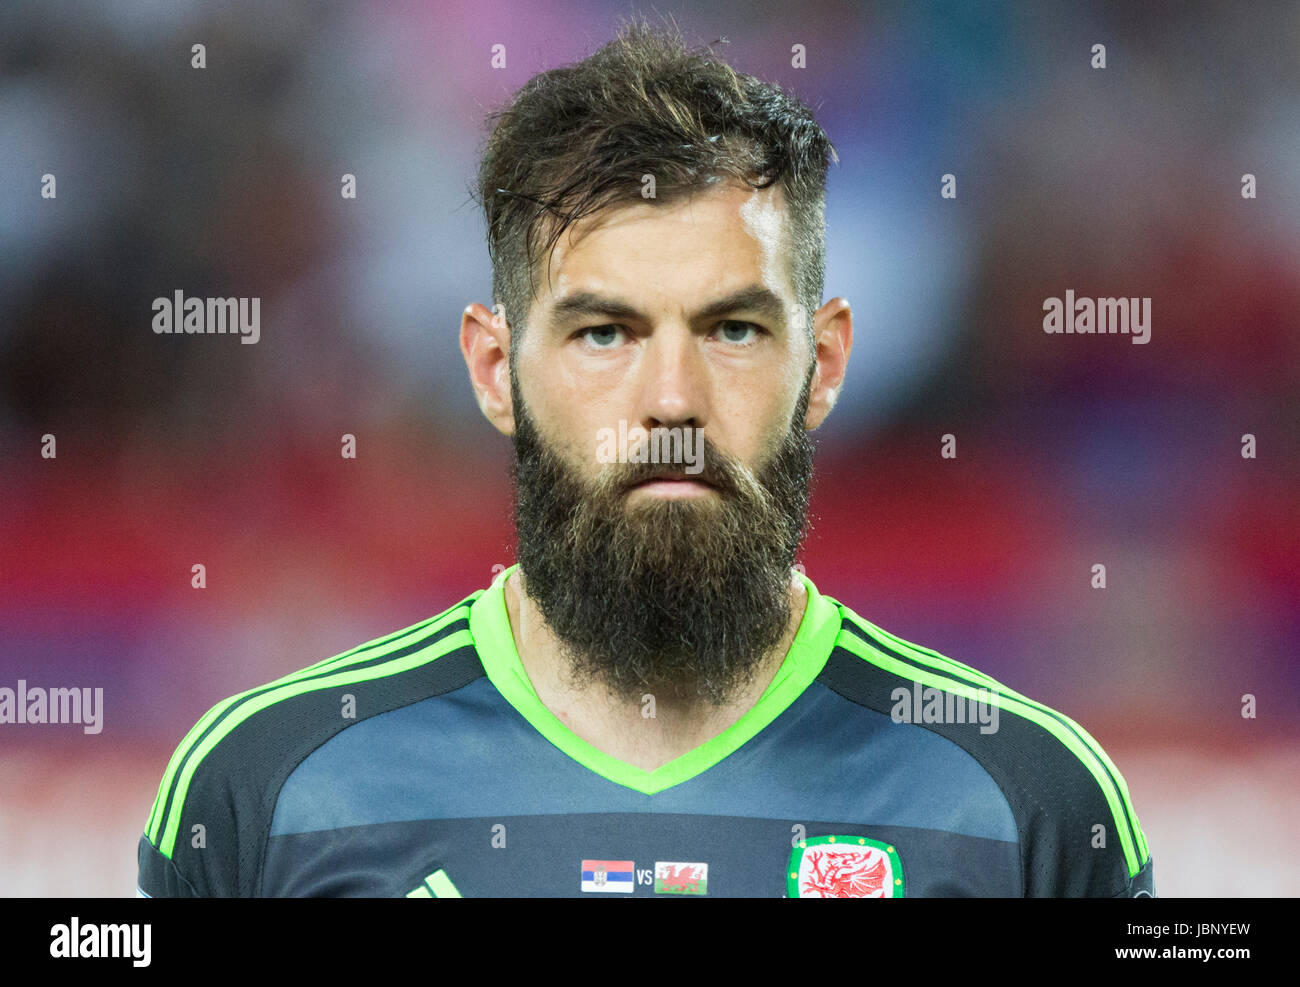 BELGRADE, SERBIA - JUNE 11, 2017: Joe Ledley of Wales looks on during the national anthem during the 2018 FIFA World Cup Qualifier match between Serbi Stock Photo